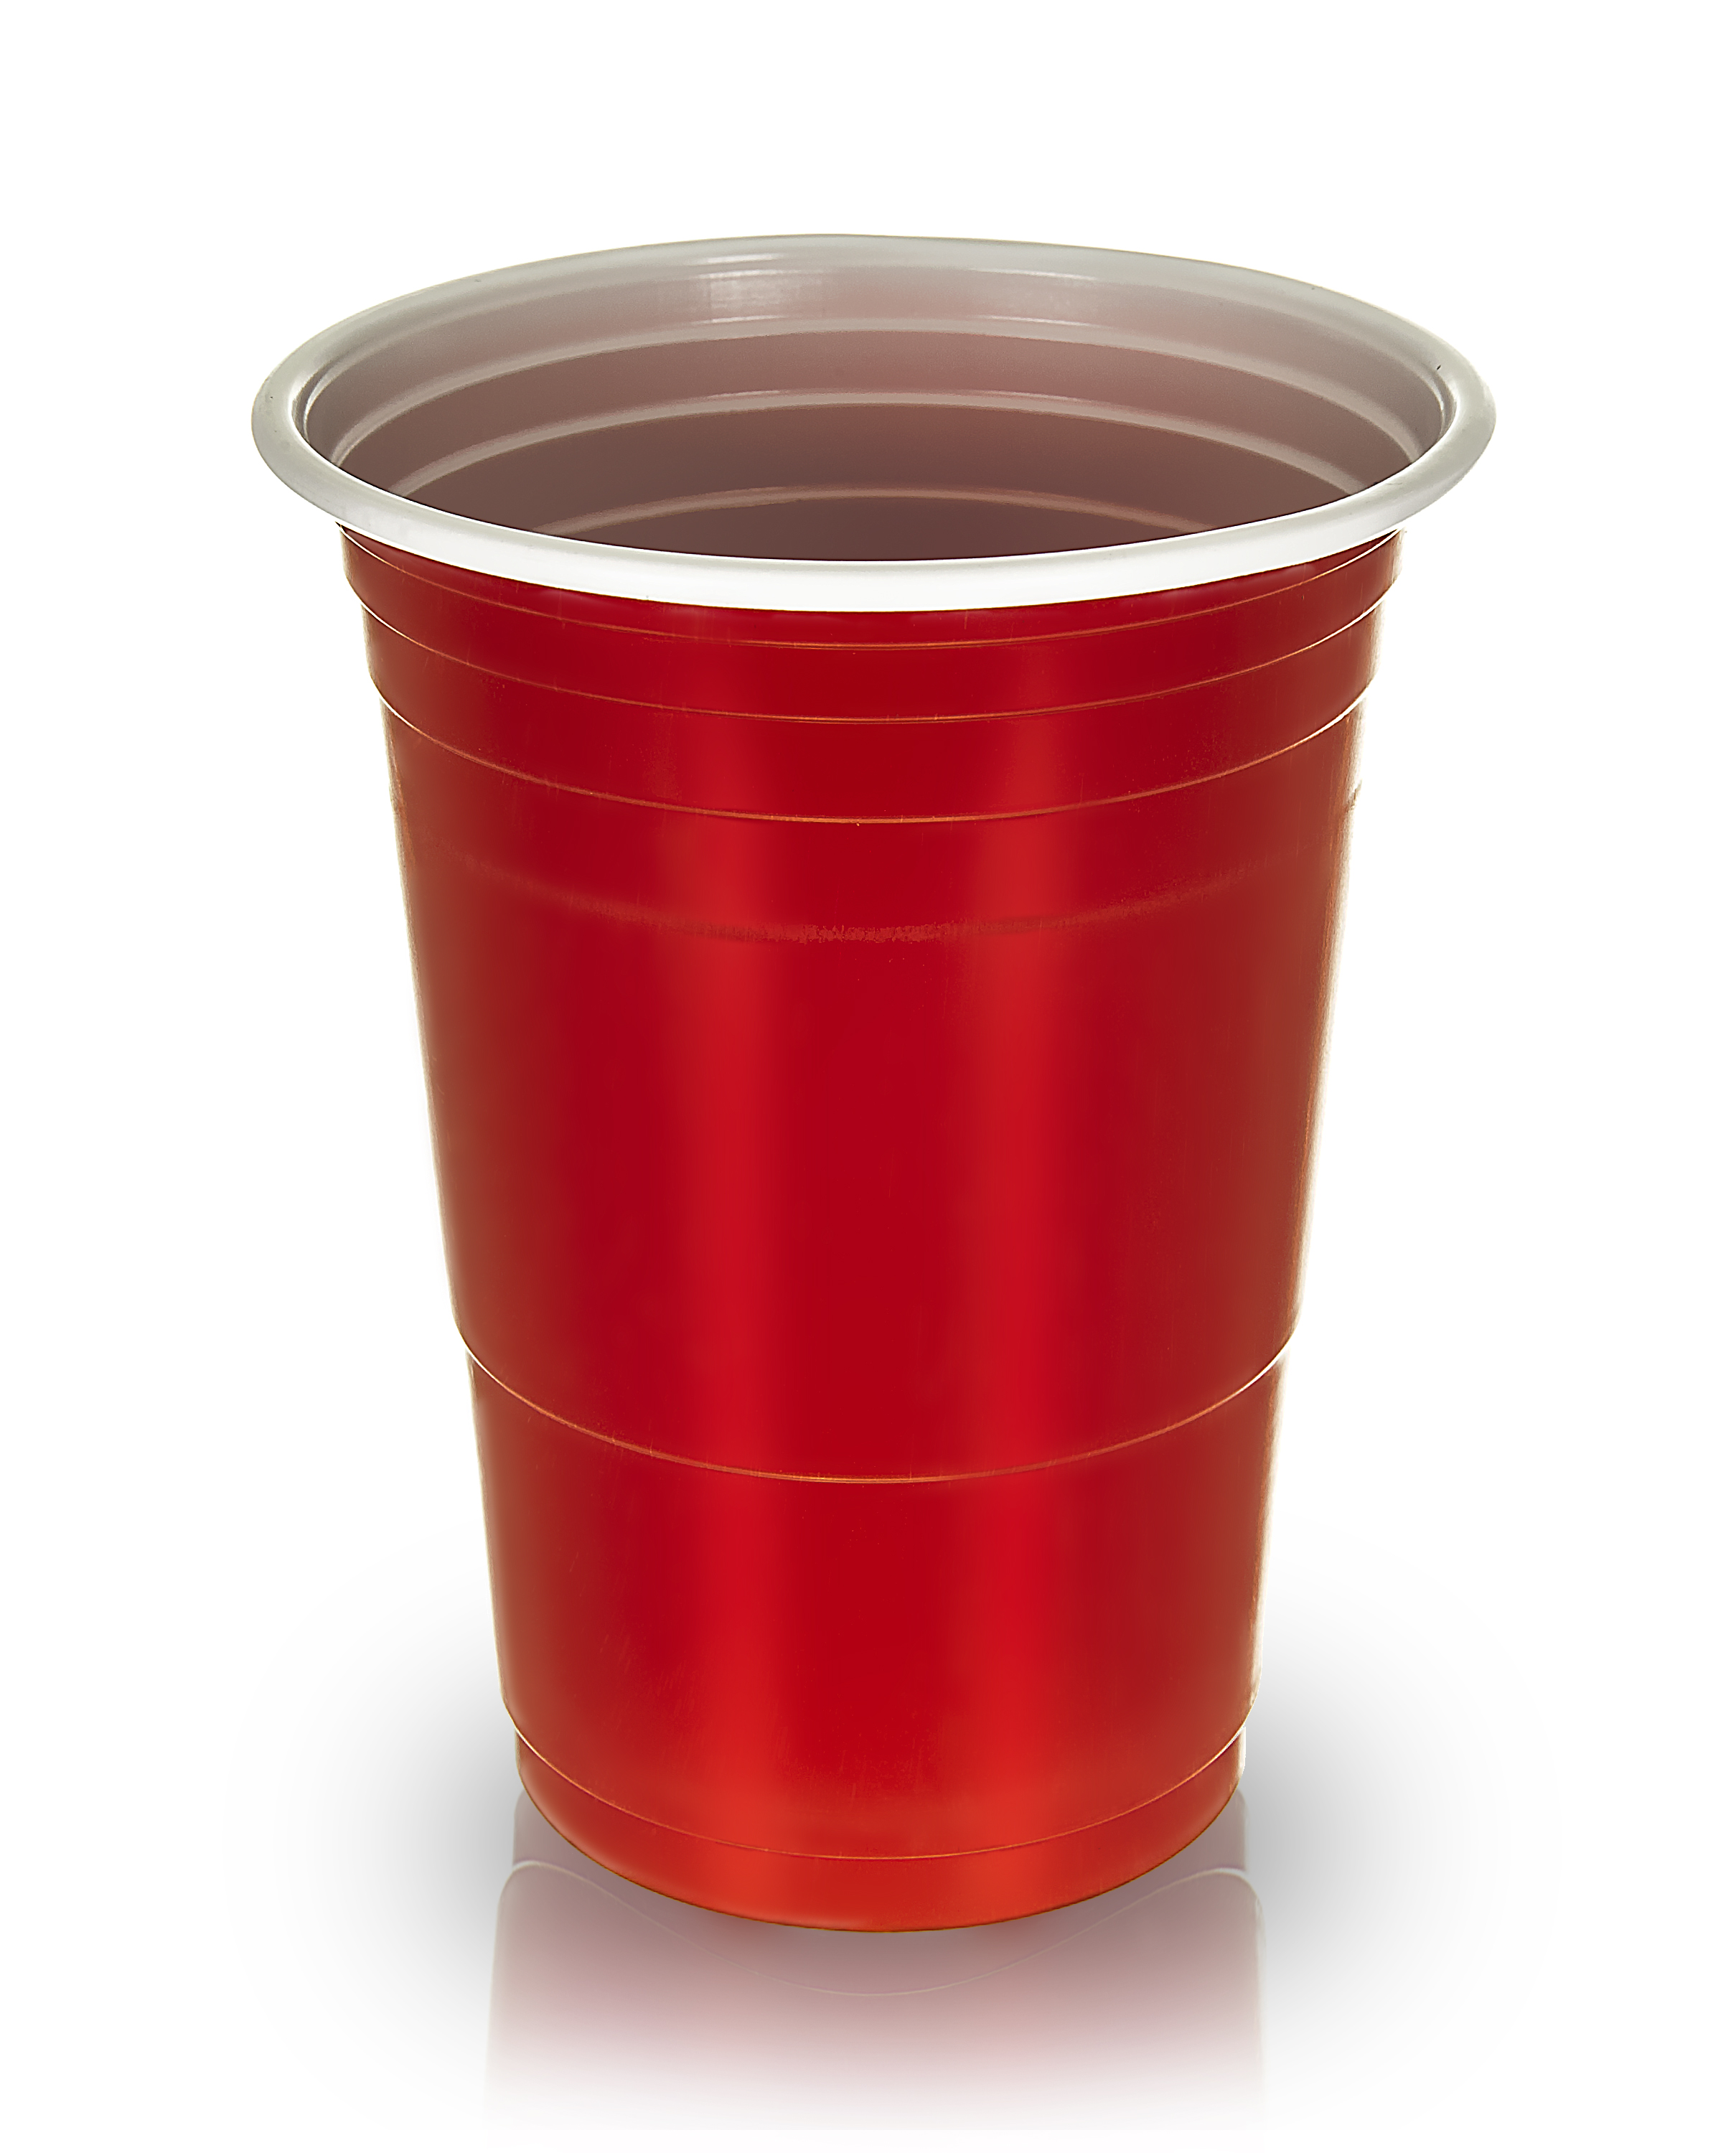 AMERICAN 16OZ PLASTIC RED PARTY CUPS BEER PONG - DISPOSABLE DRINKING